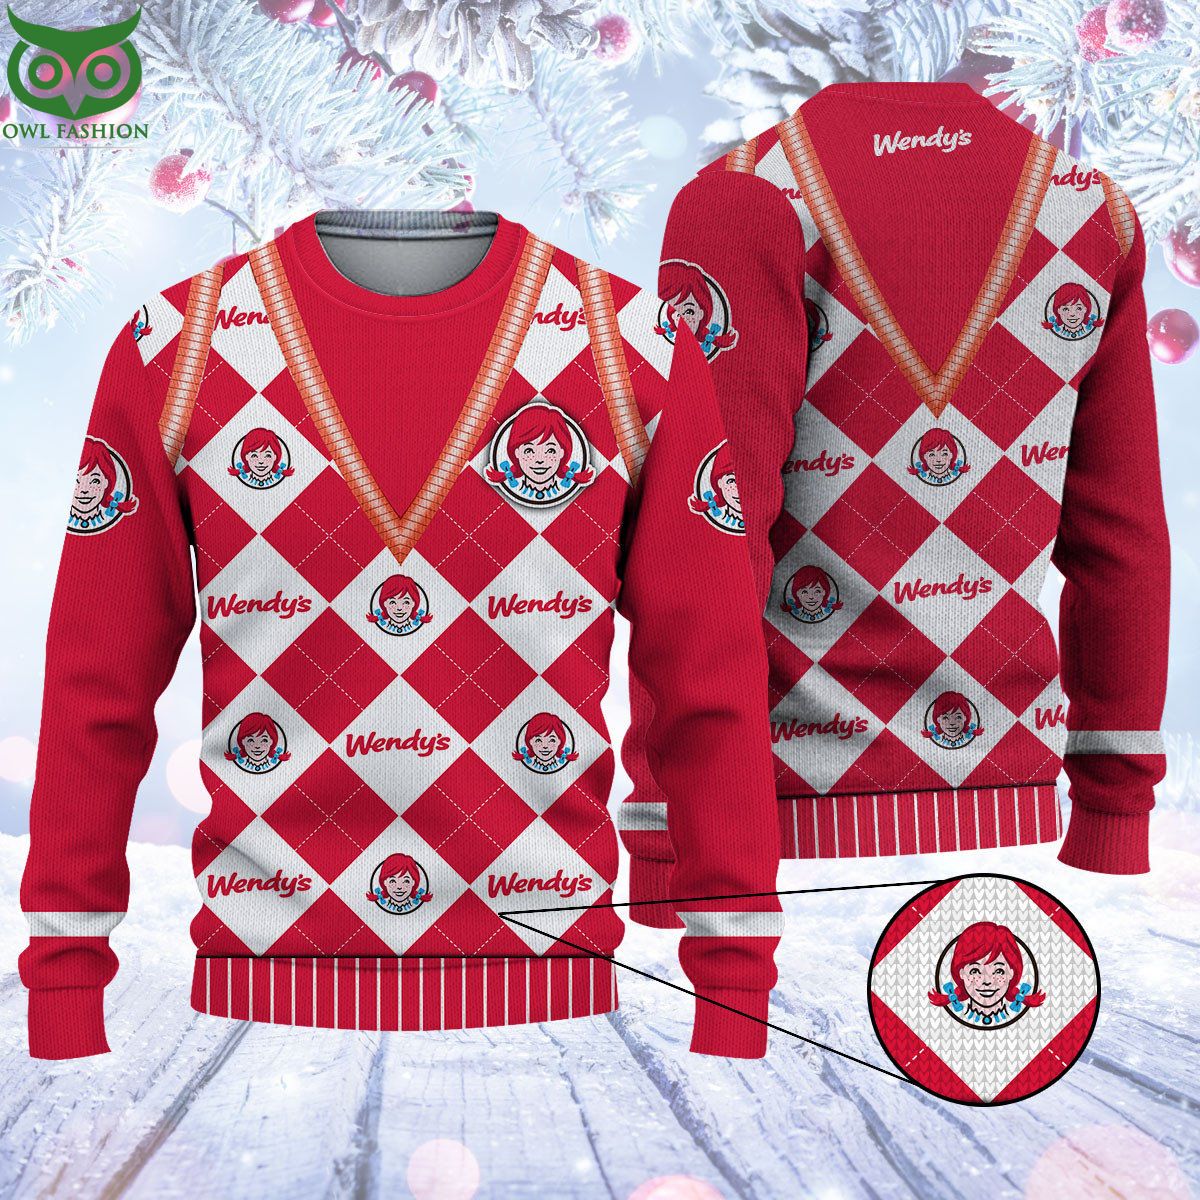 Wendy'S Red Ugly Sweater This design has a strong emotional impact.